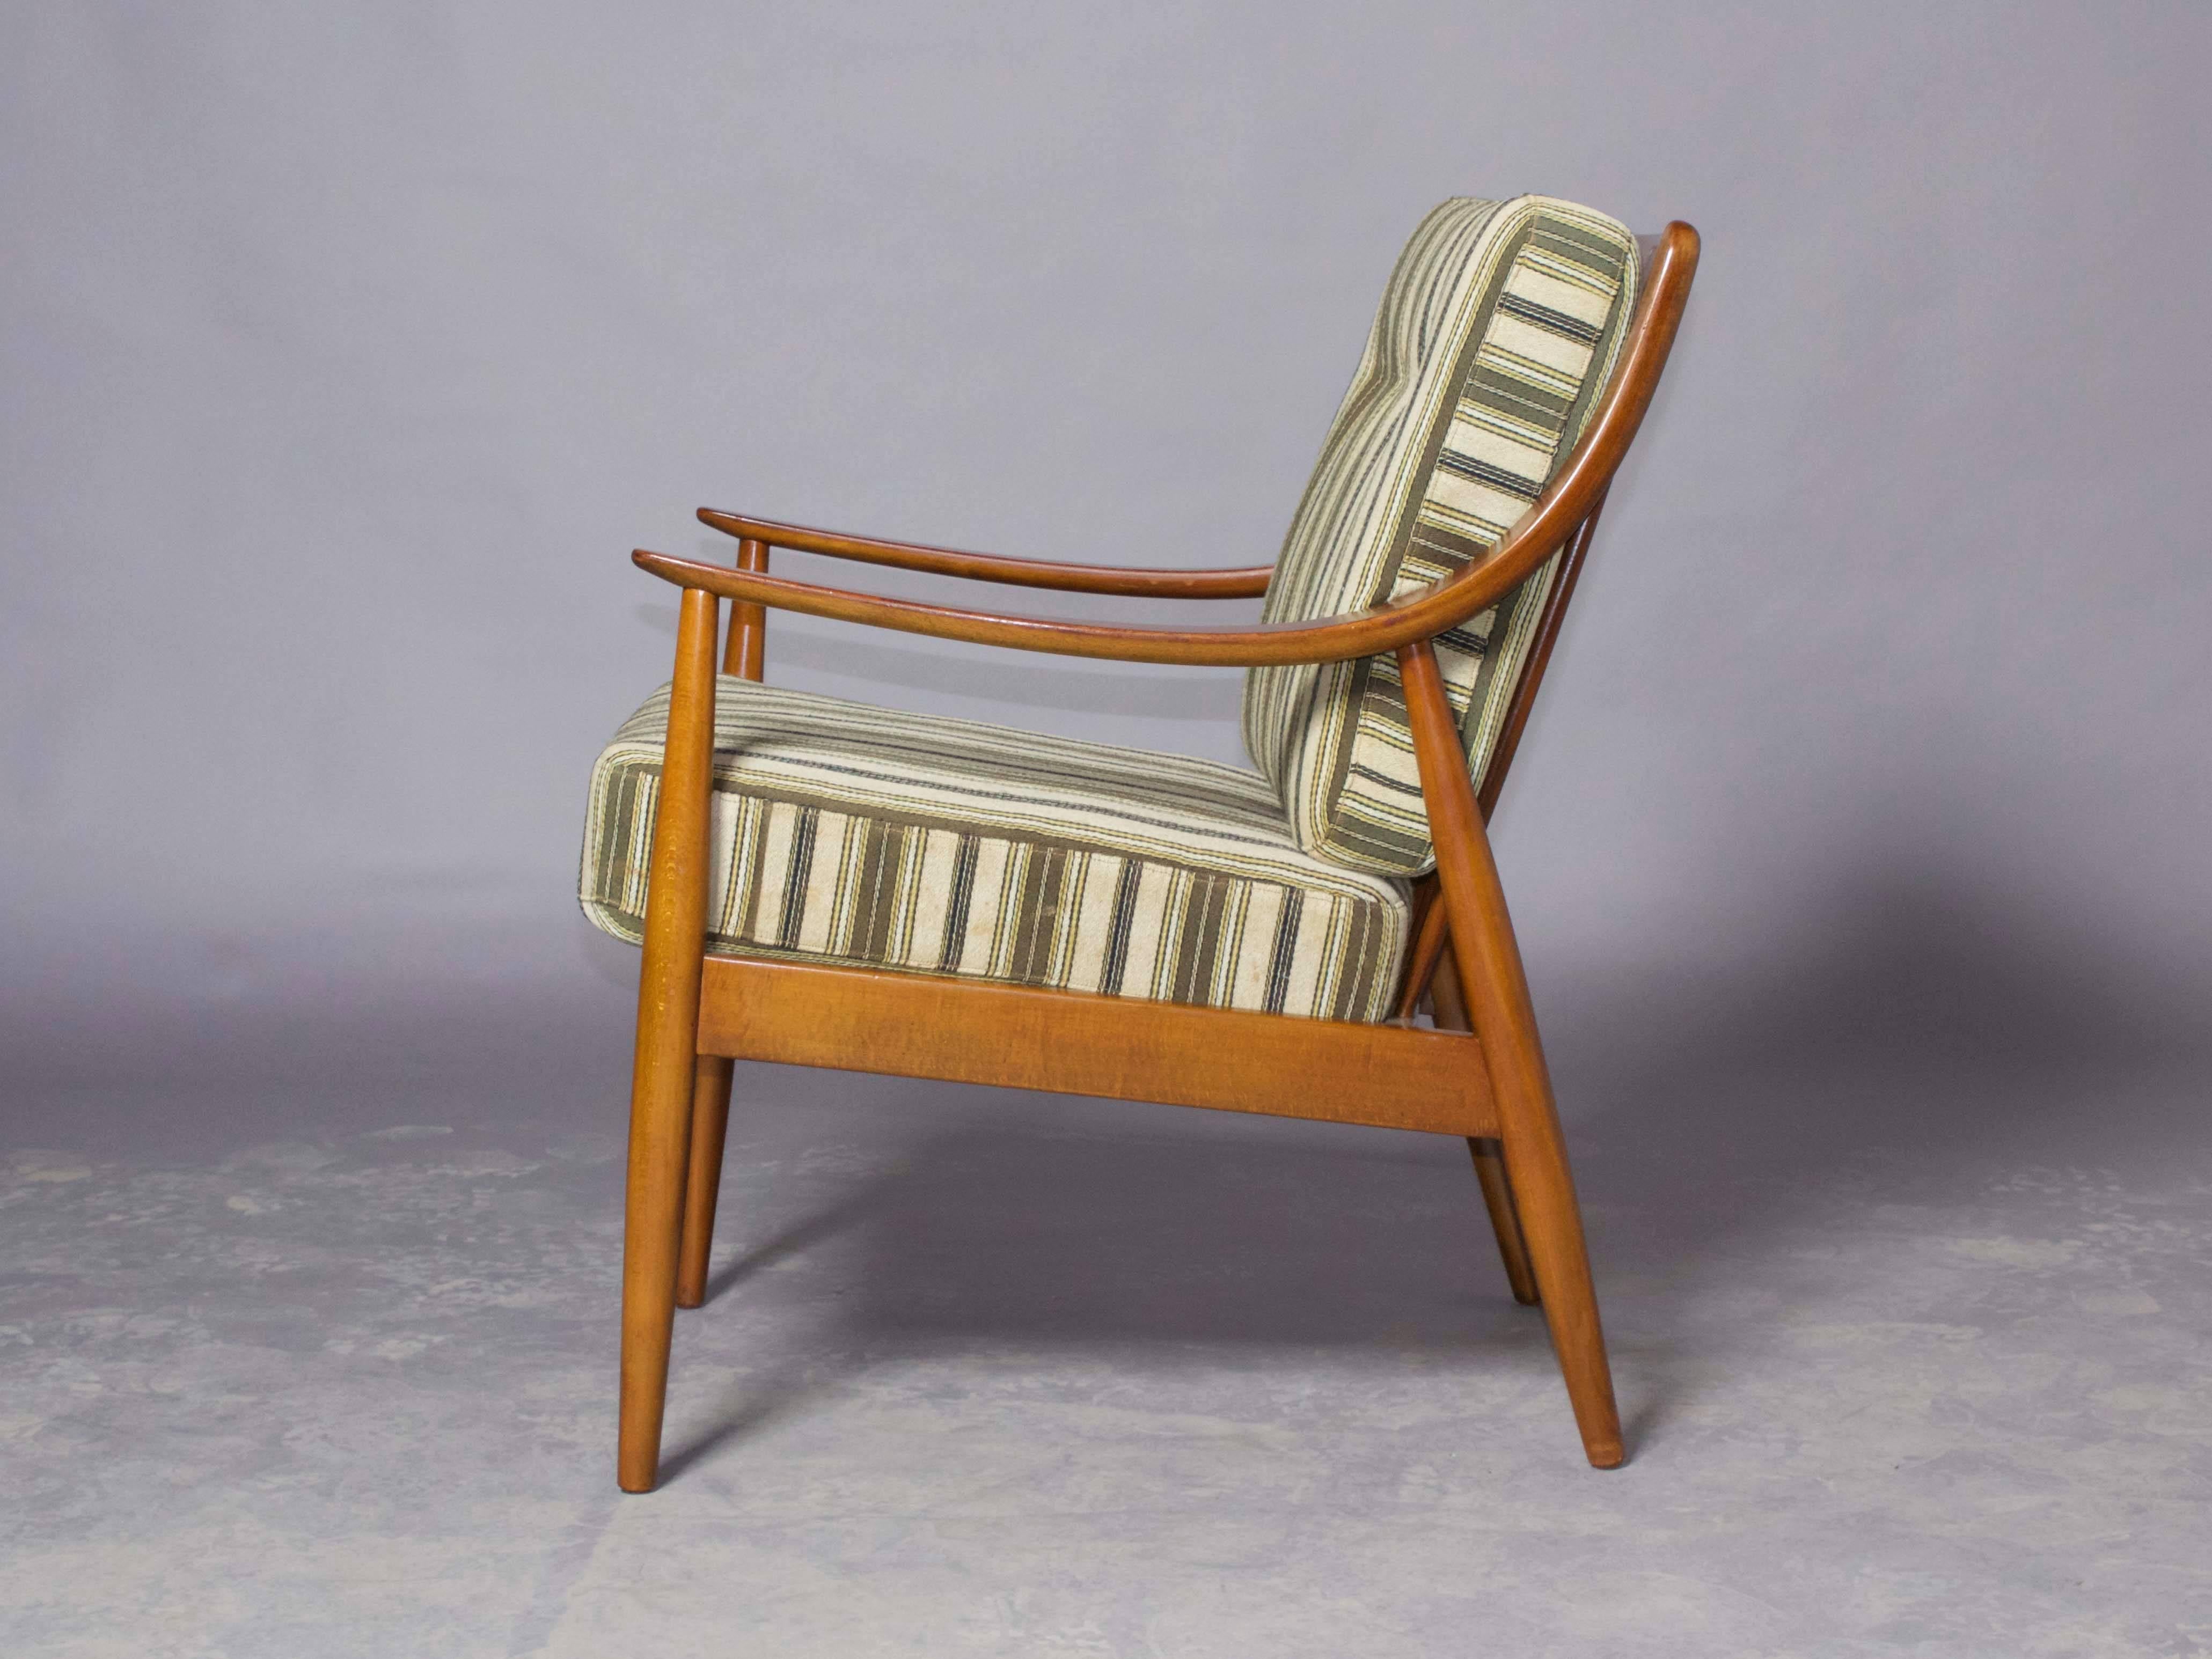 Vintage 1950s Hvidt & Molgaard Armchair

This Danish Lounge Chair is in like new condition. The chair, the techniques used, everything about this chair is exquisite. Fabric is original and are slightly stained, or we can re-upholster it to fit